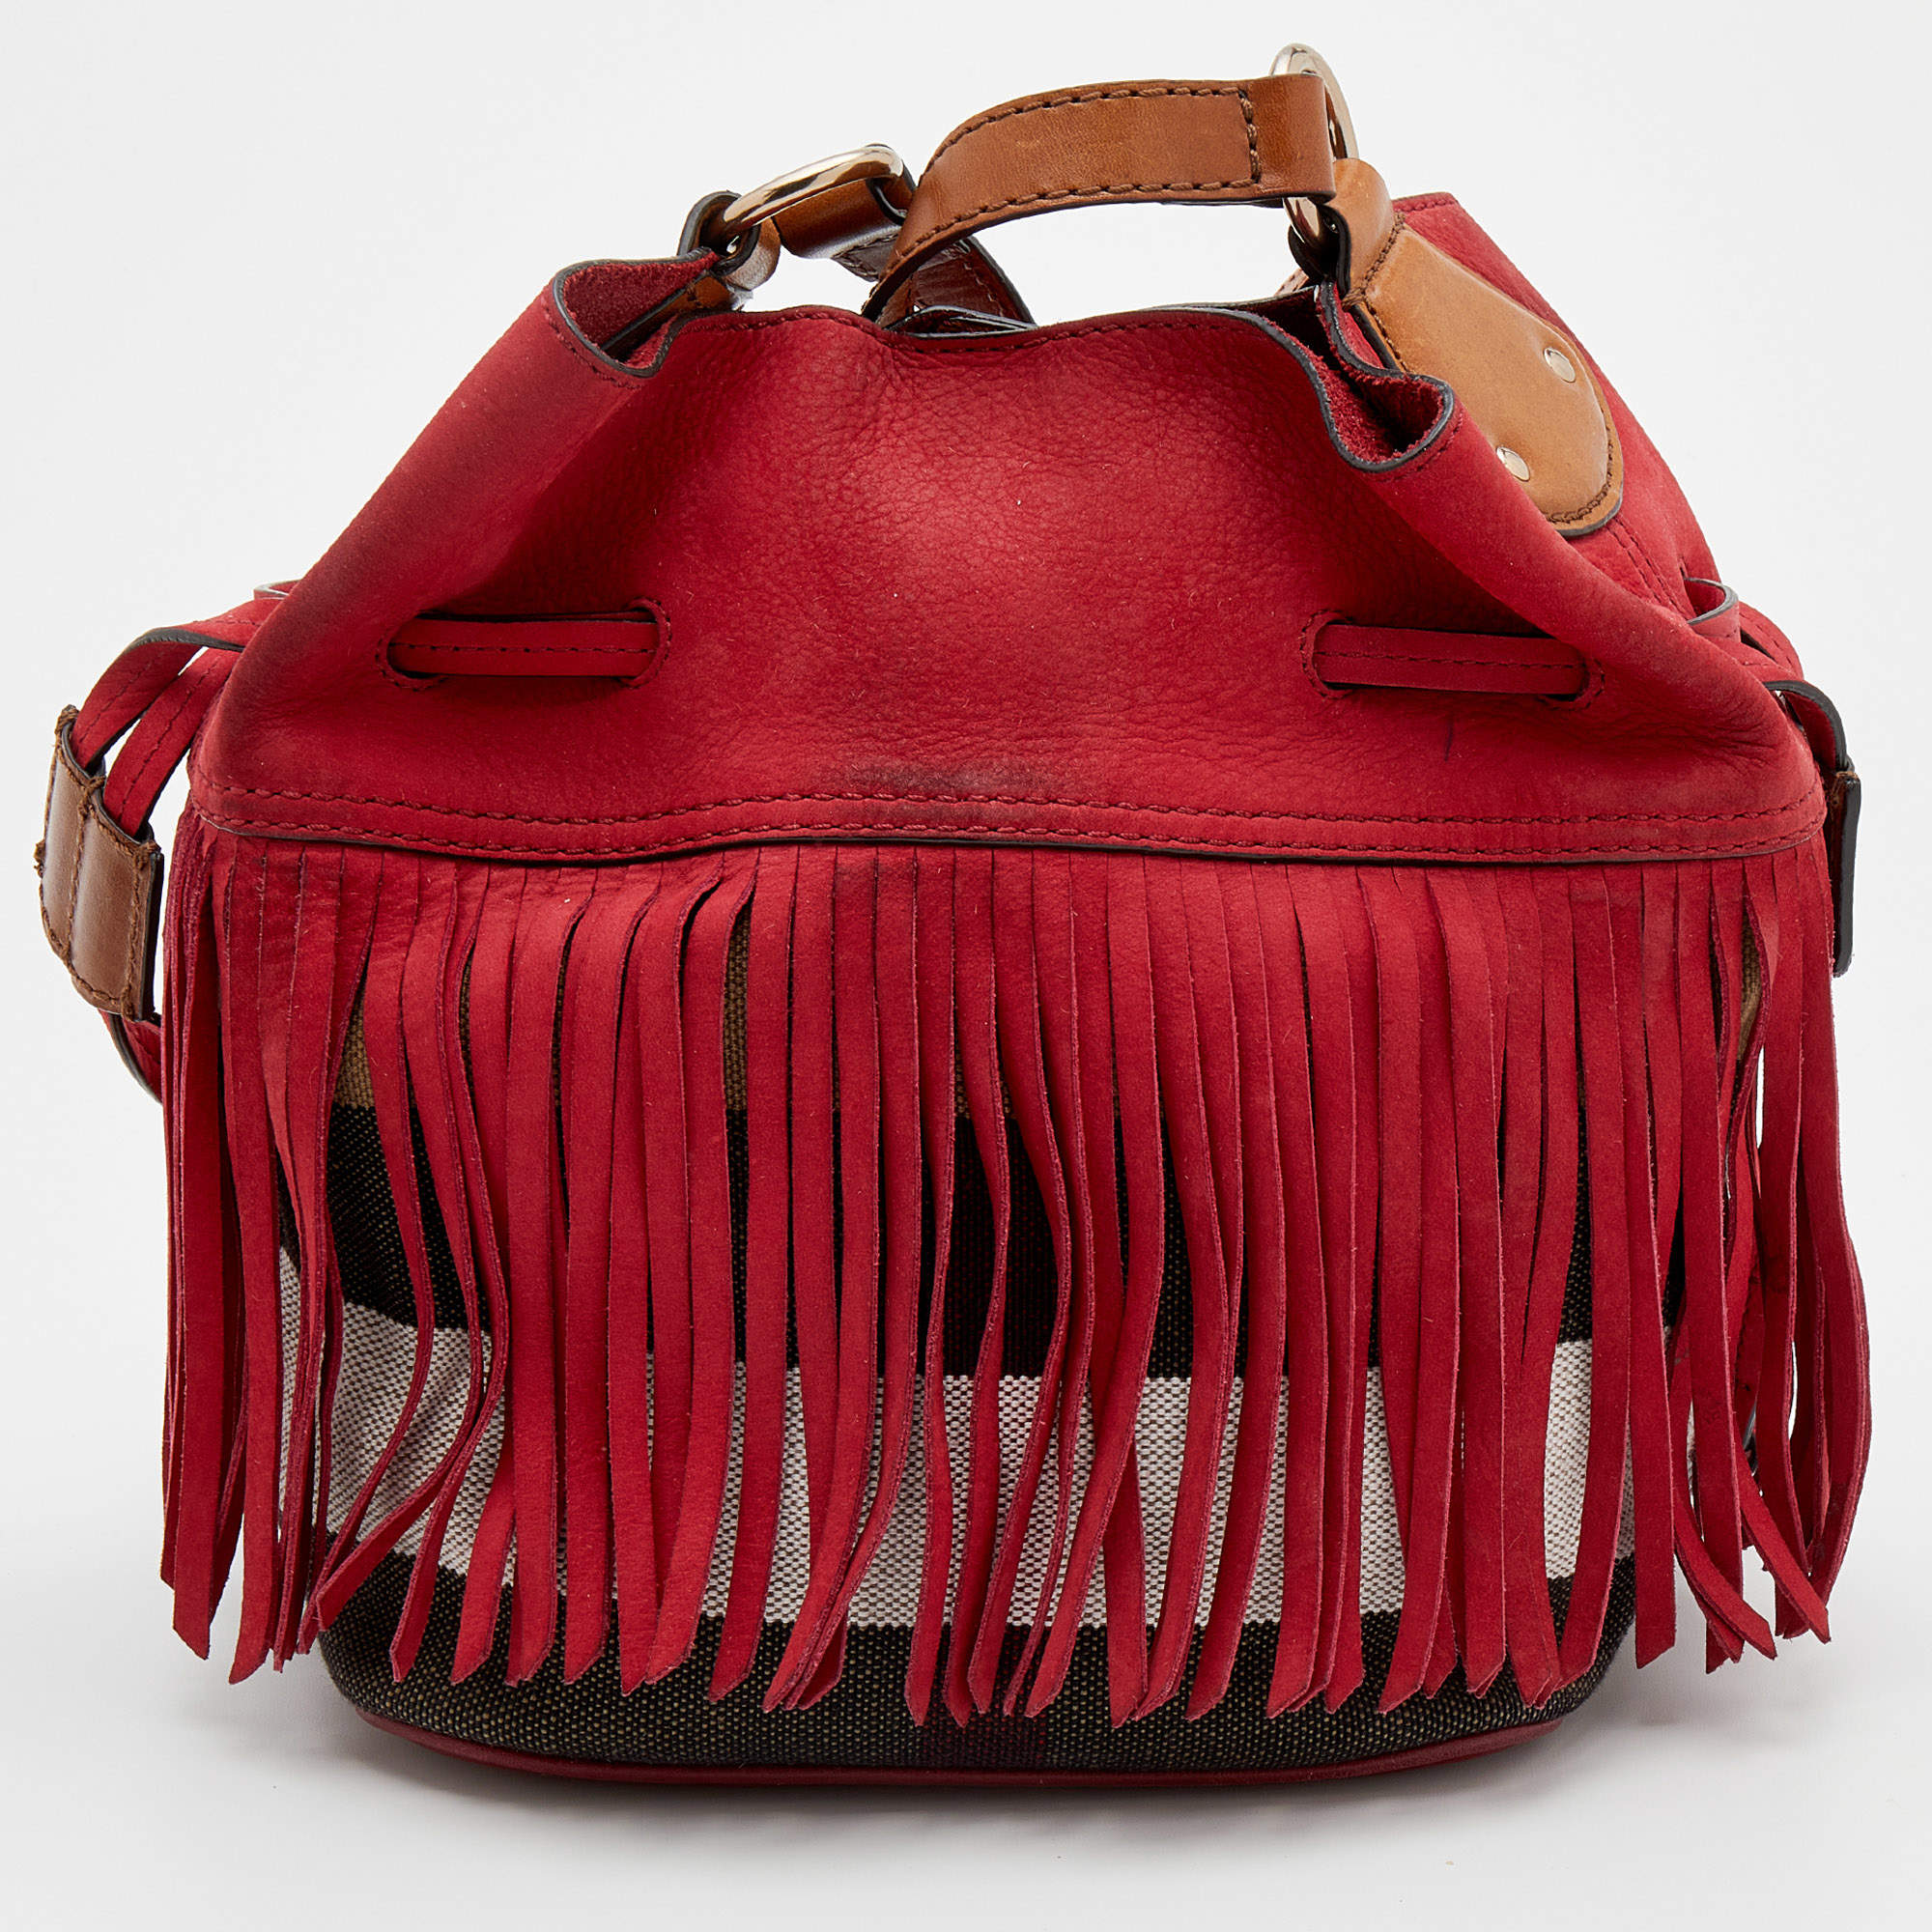 Burberry Multicolor Leather And Canvas Fringe Bucket Bag Burberry | TLC